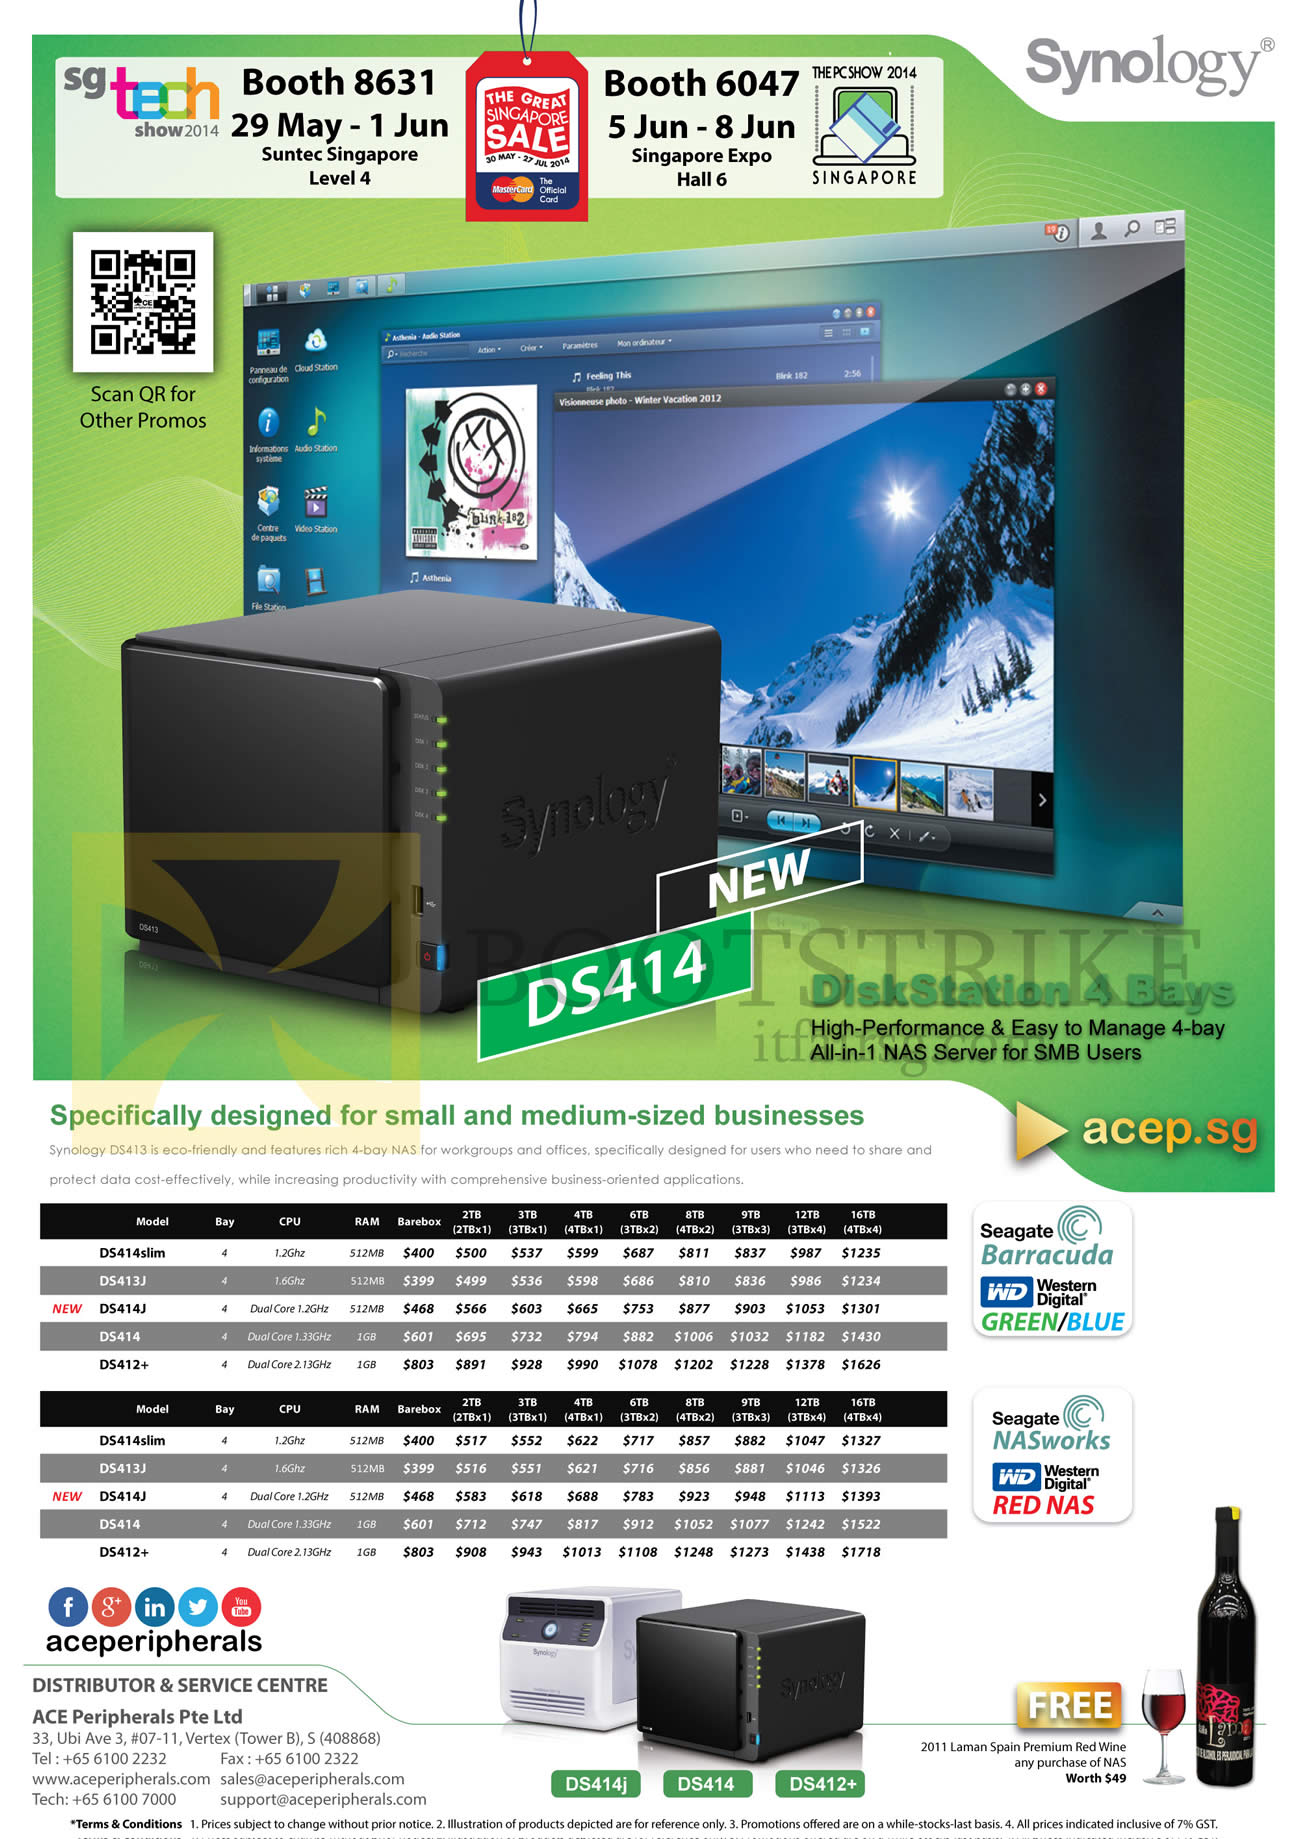 PC SHOW 2014 price list image brochure of ACE Peripherals Synology NAS DiskStations DS413J, DS414J, DS413, DS414, DS412